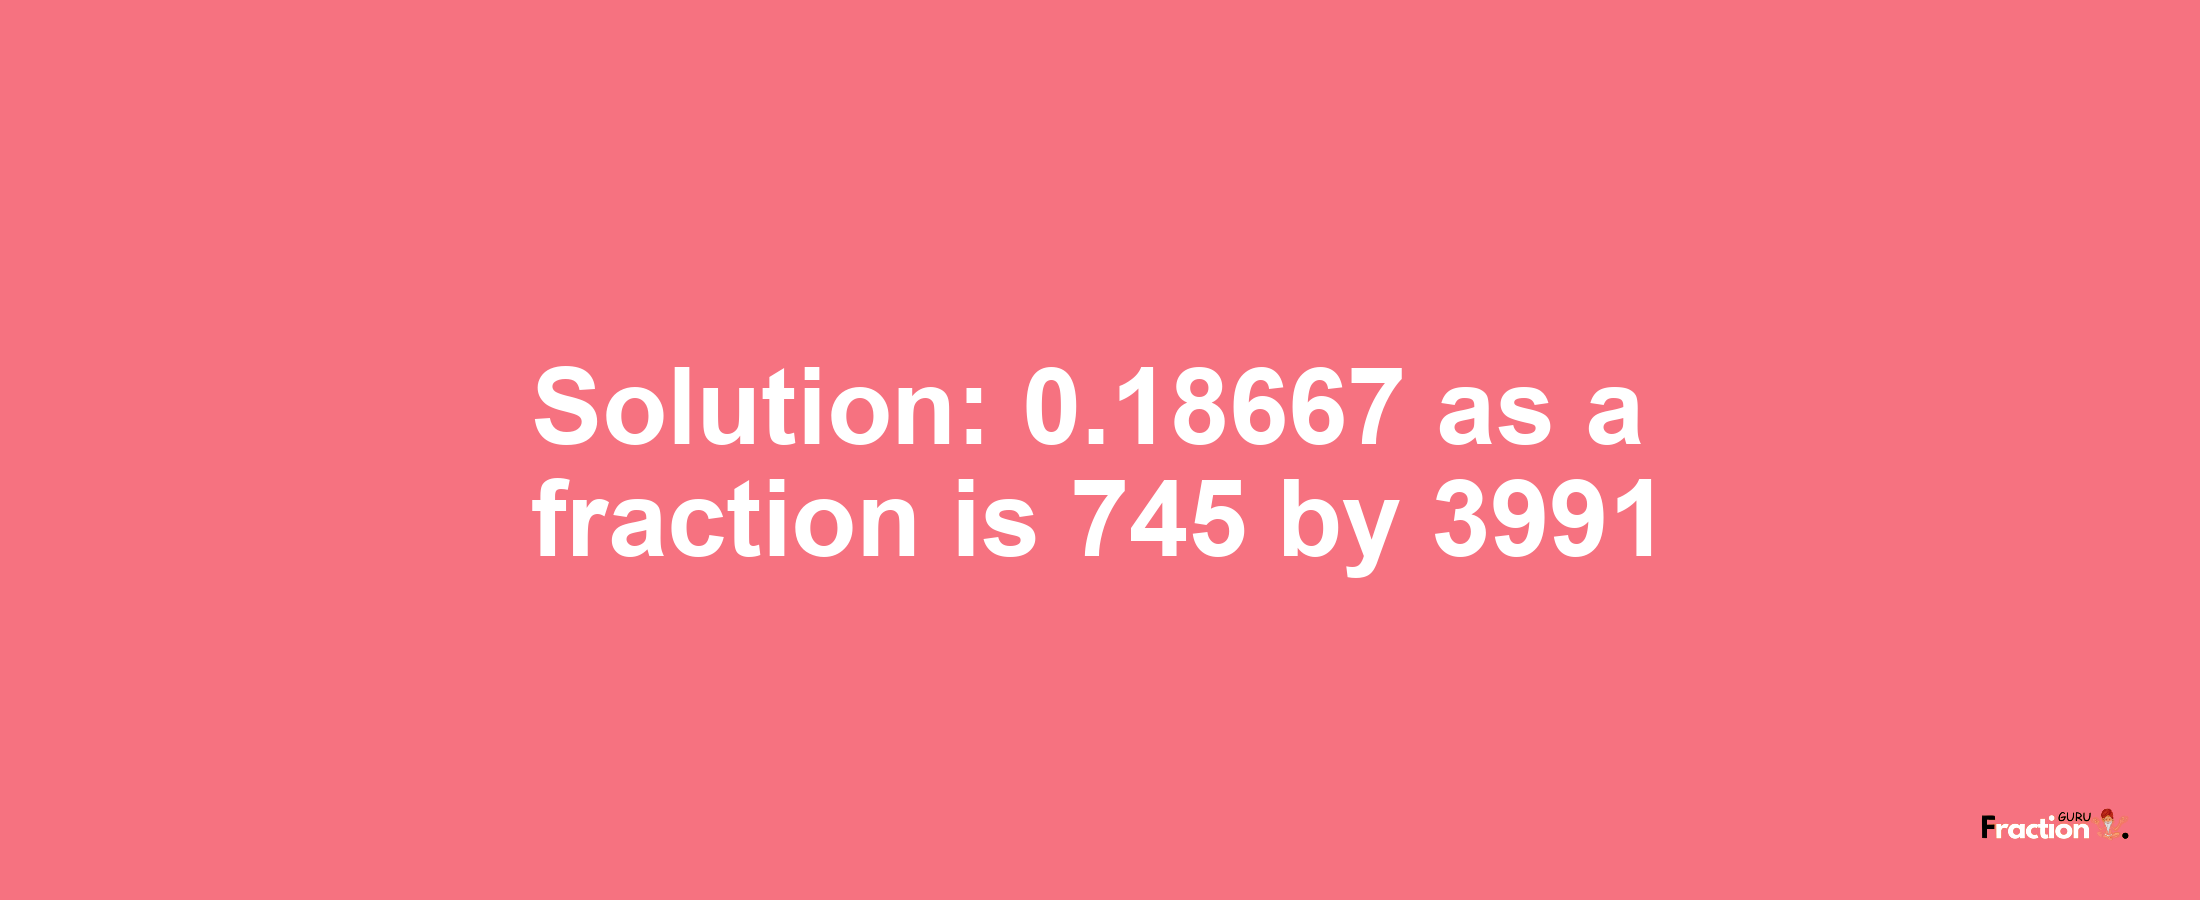 Solution:0.18667 as a fraction is 745/3991